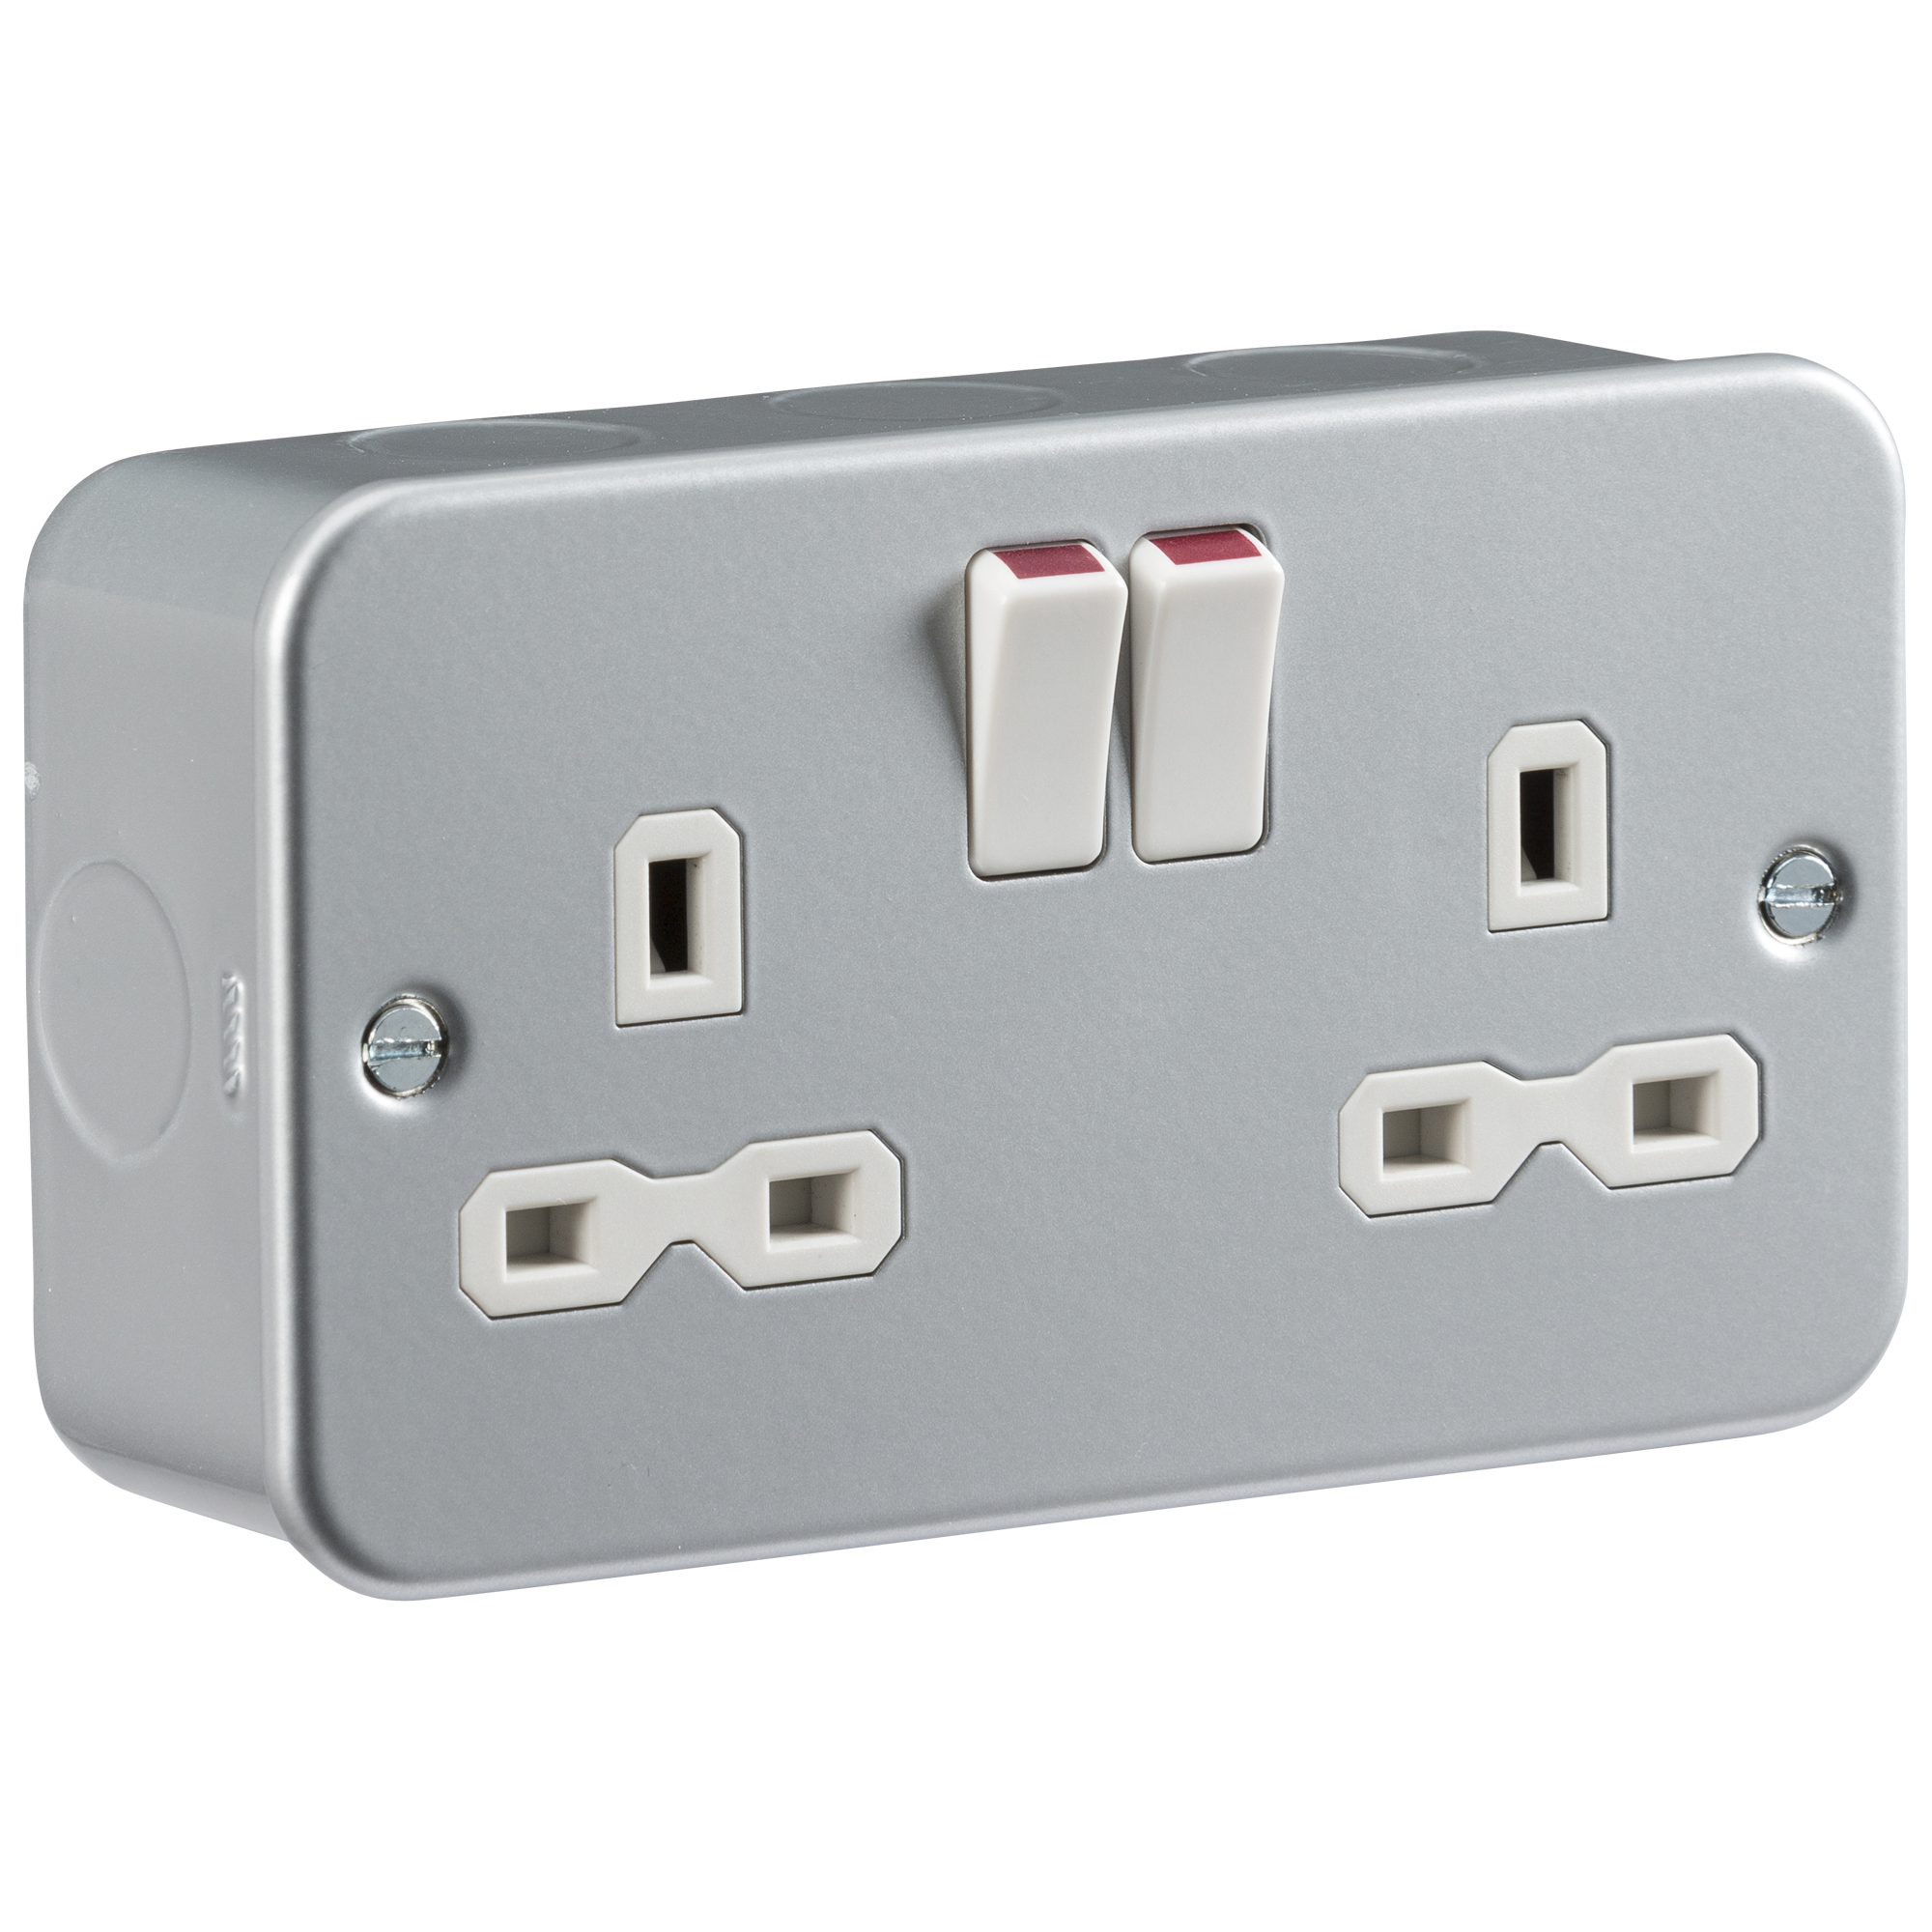 Metal Clad 13A 2G DP Switched Socket - MR9000 